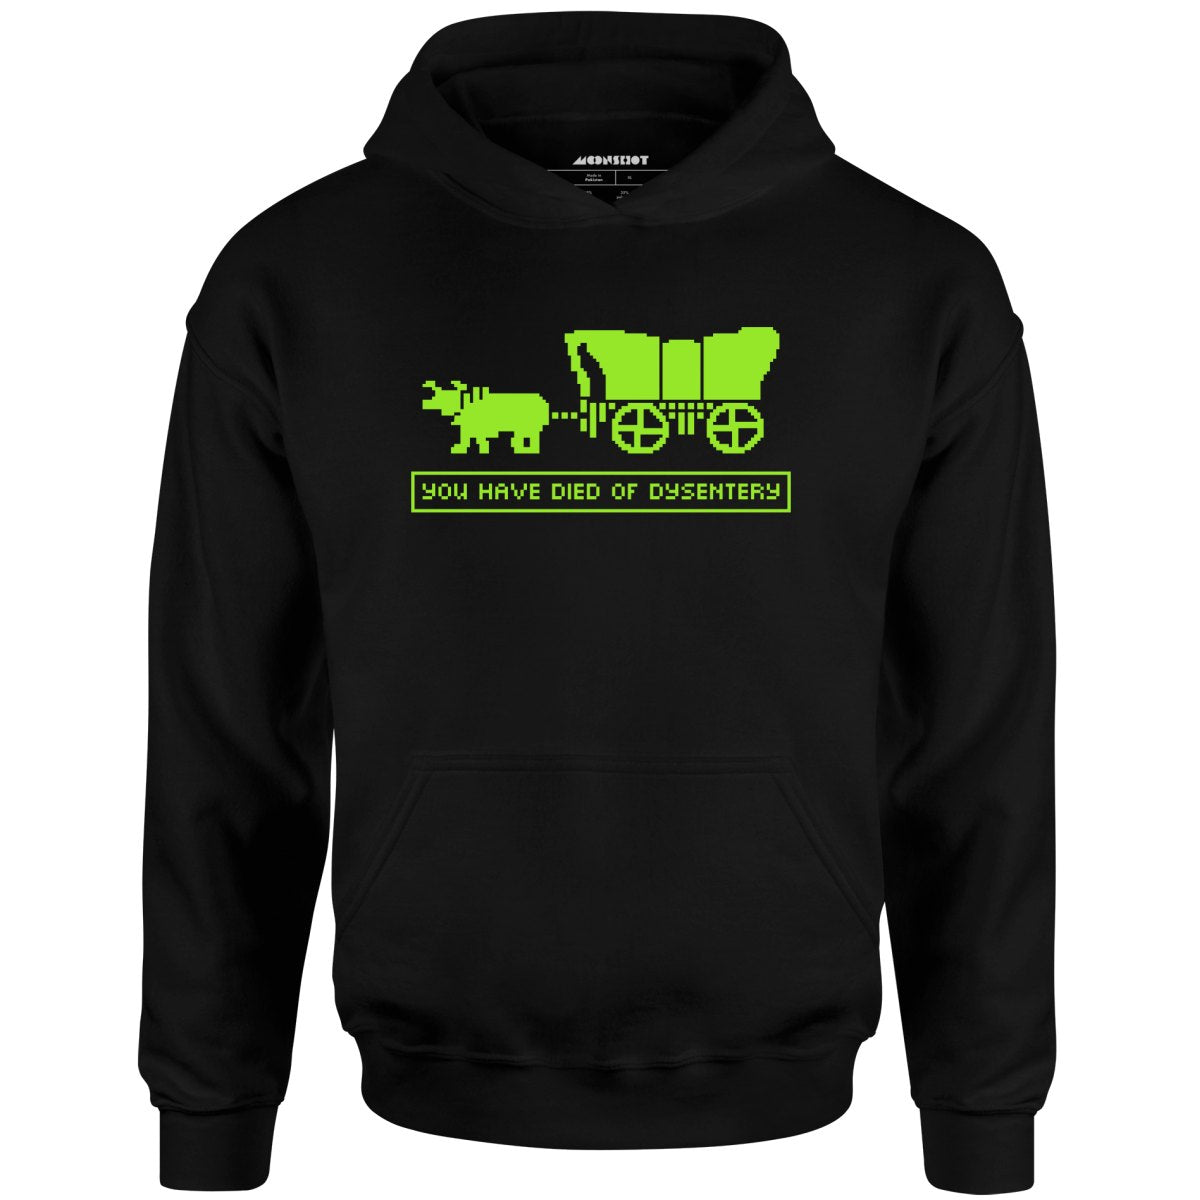 You Have Died of Dysentery - Unisex Hoodie